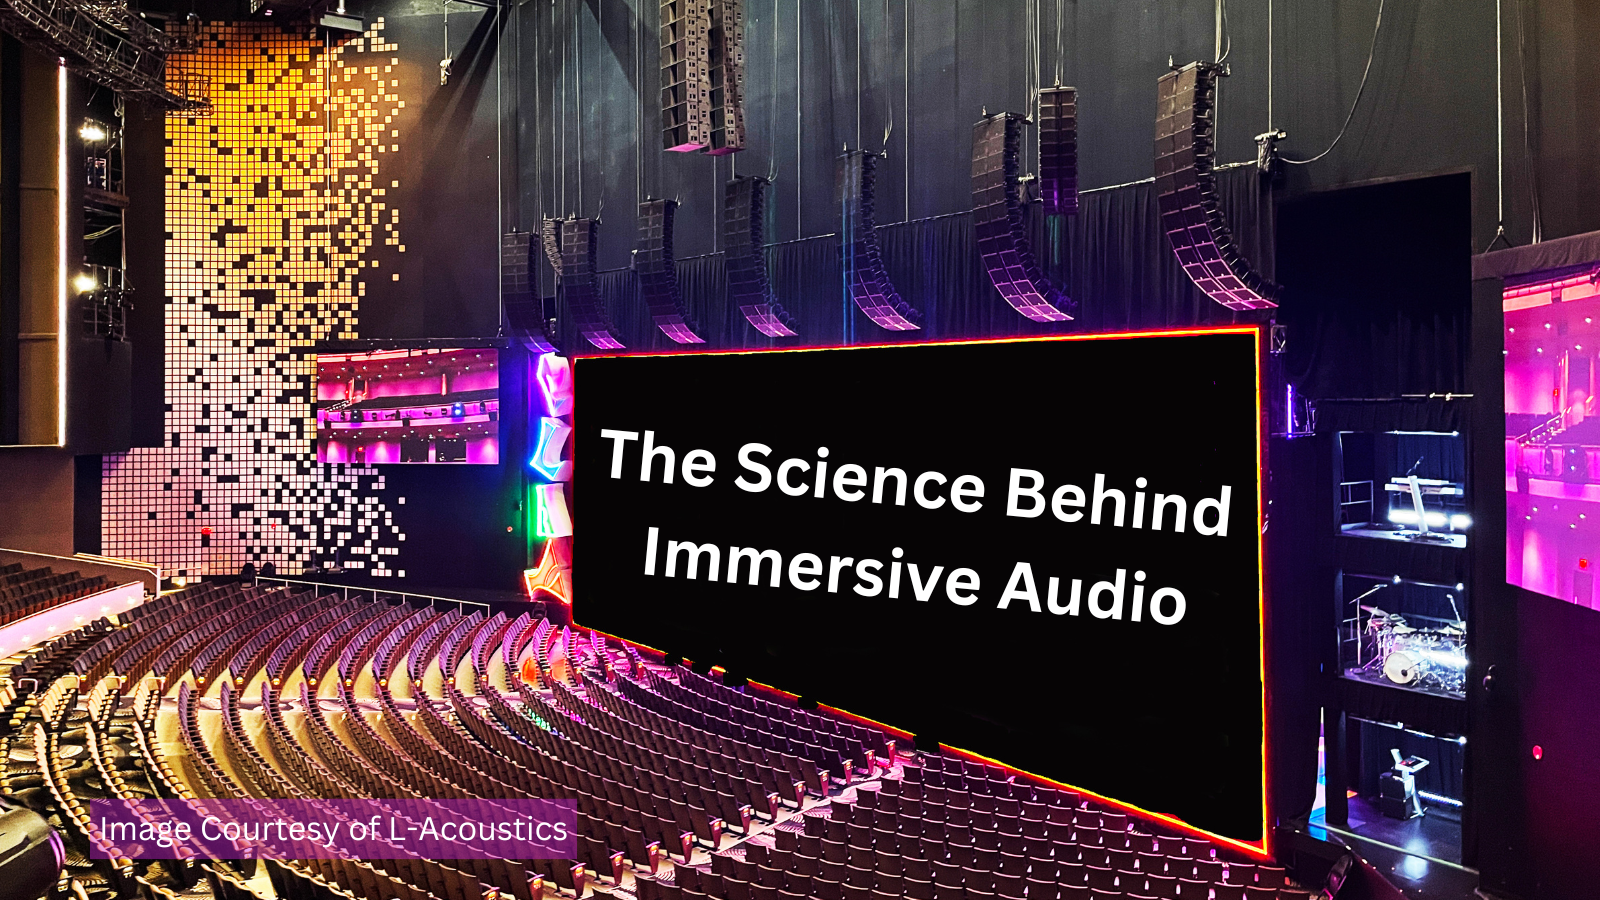 The Science Behind Immersive Audio